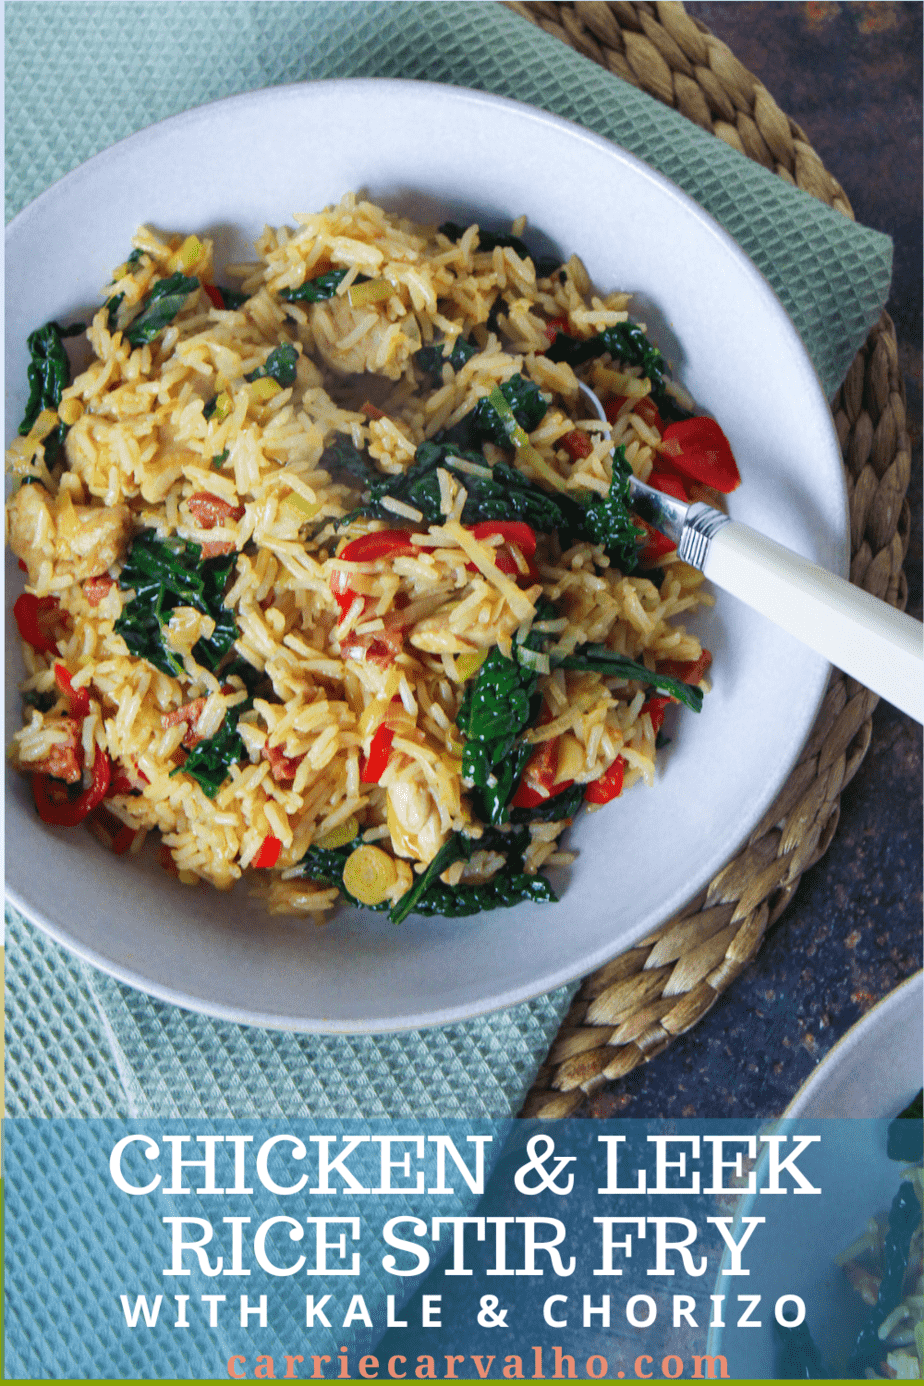 Chicken and Leek Stir-Fry with Chorizo and Kale